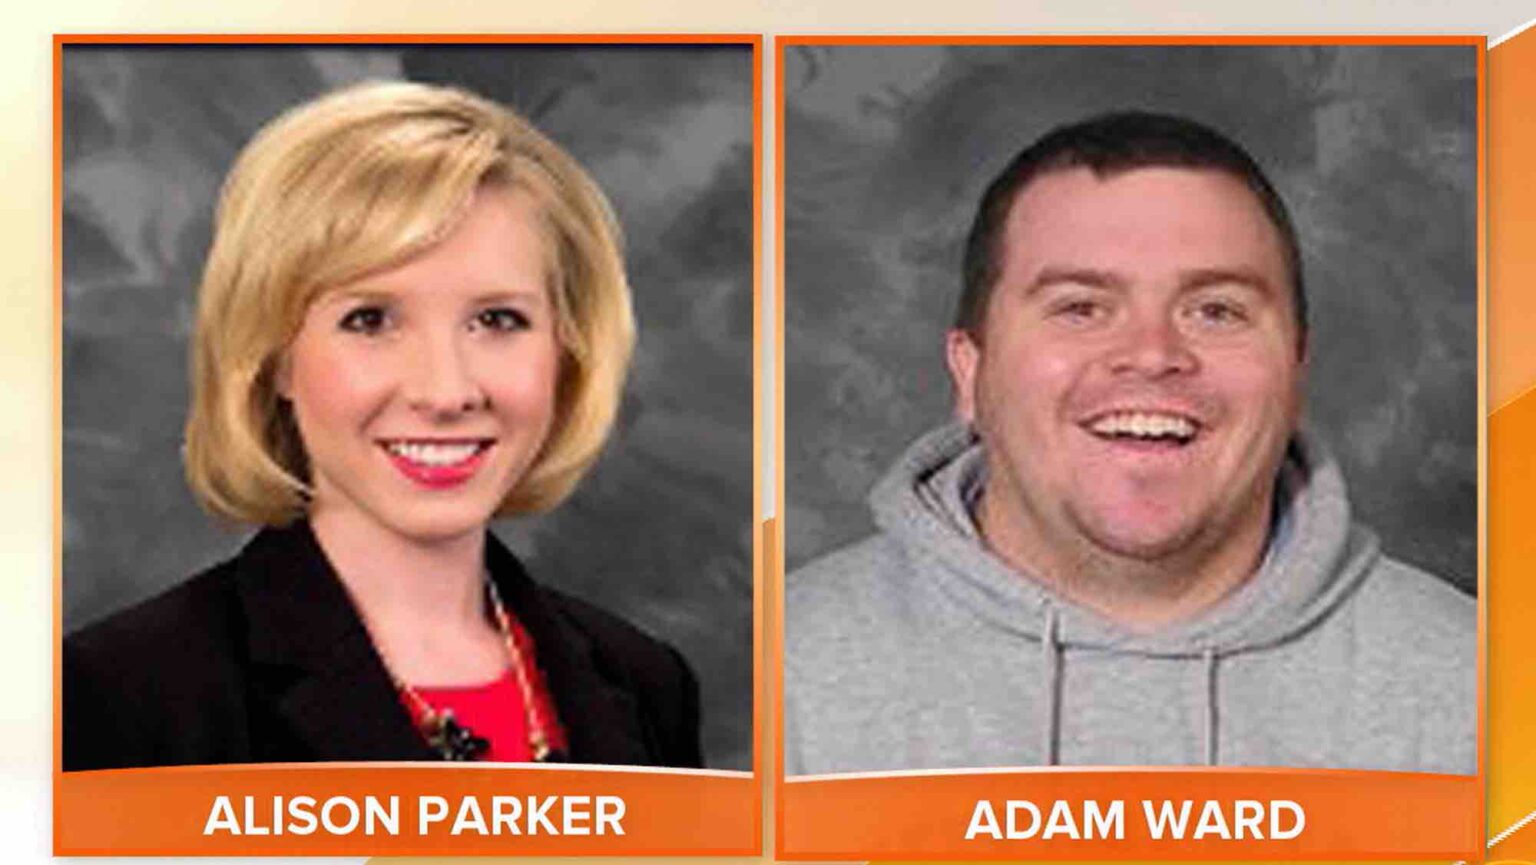 How were Alison Parker and Adam Ward murdered on camera? Learn the shocking details of this disturbing dark crime.